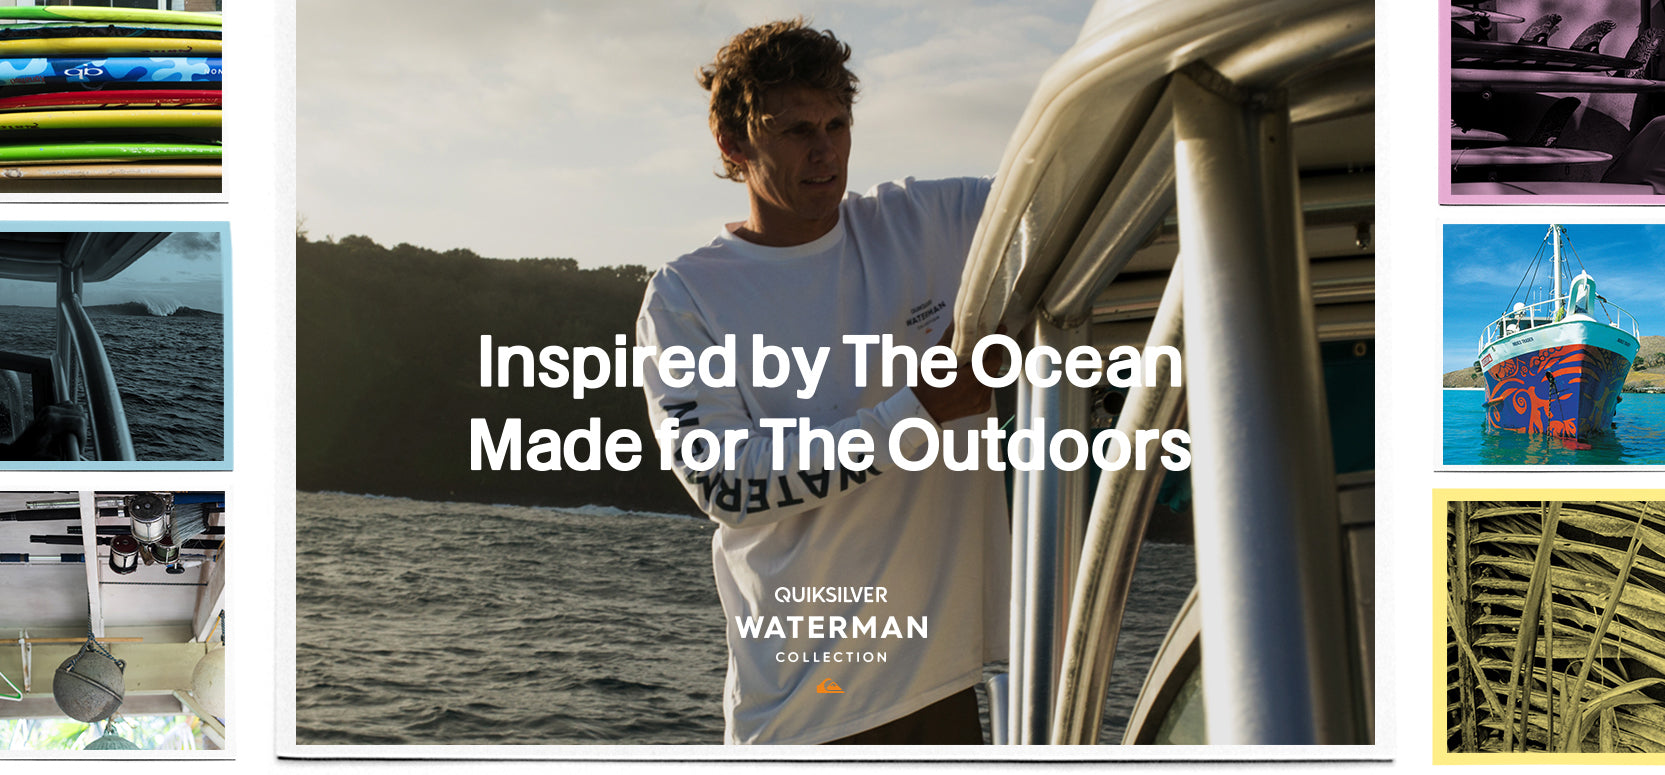 Quiksilver 2018 | Made for The Outdoor Adventure Waterman Collection